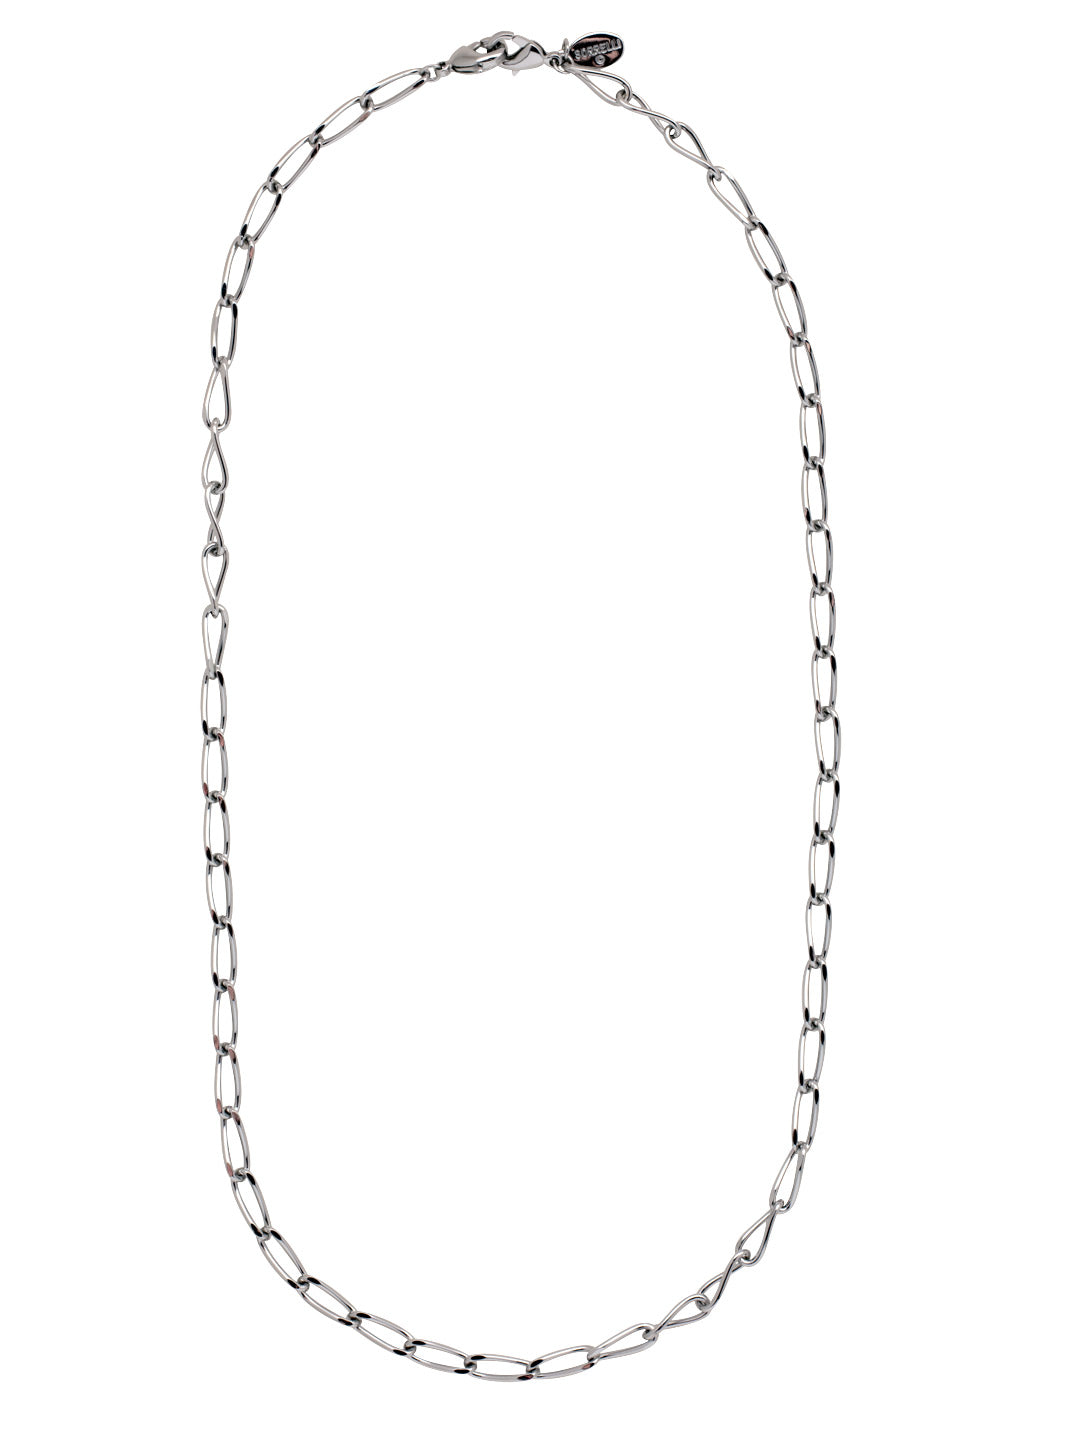 Sybil Tennis Necklace - 4NFC11PDMTL - <p>The Sybil Tennis Necklace features a single adjustable twisted curb chain, secured with a lobster claw clasp. From Sorrelli's Bare Metallic collection in our Palladium finish.</p>